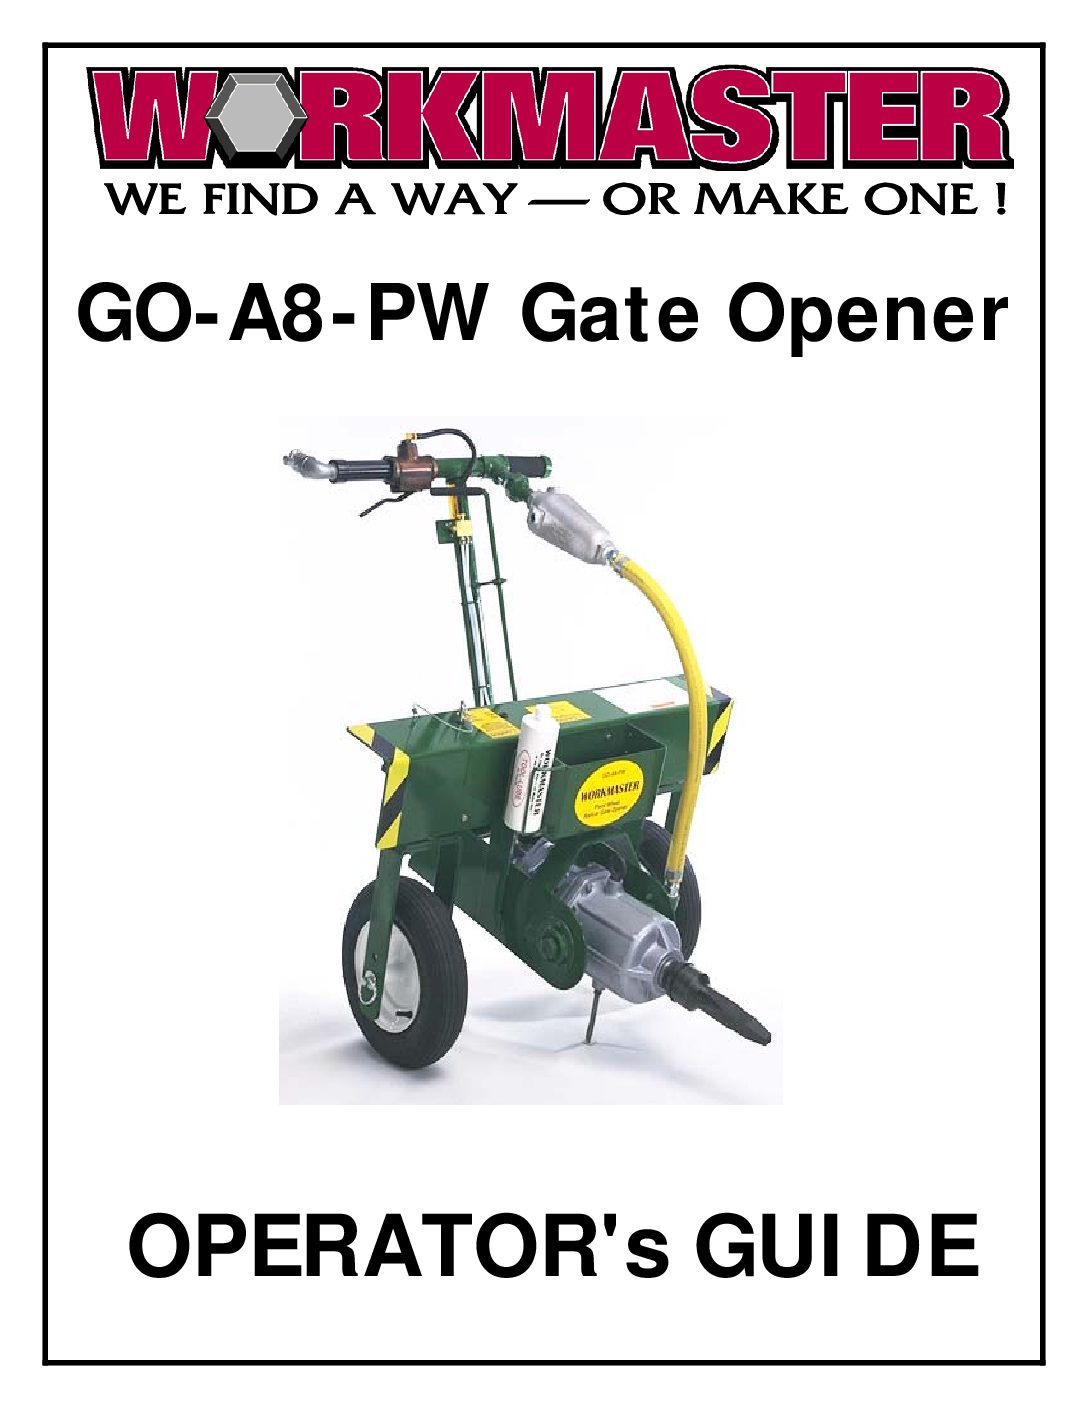 WorkMaster Operator’s Guide & Parts List